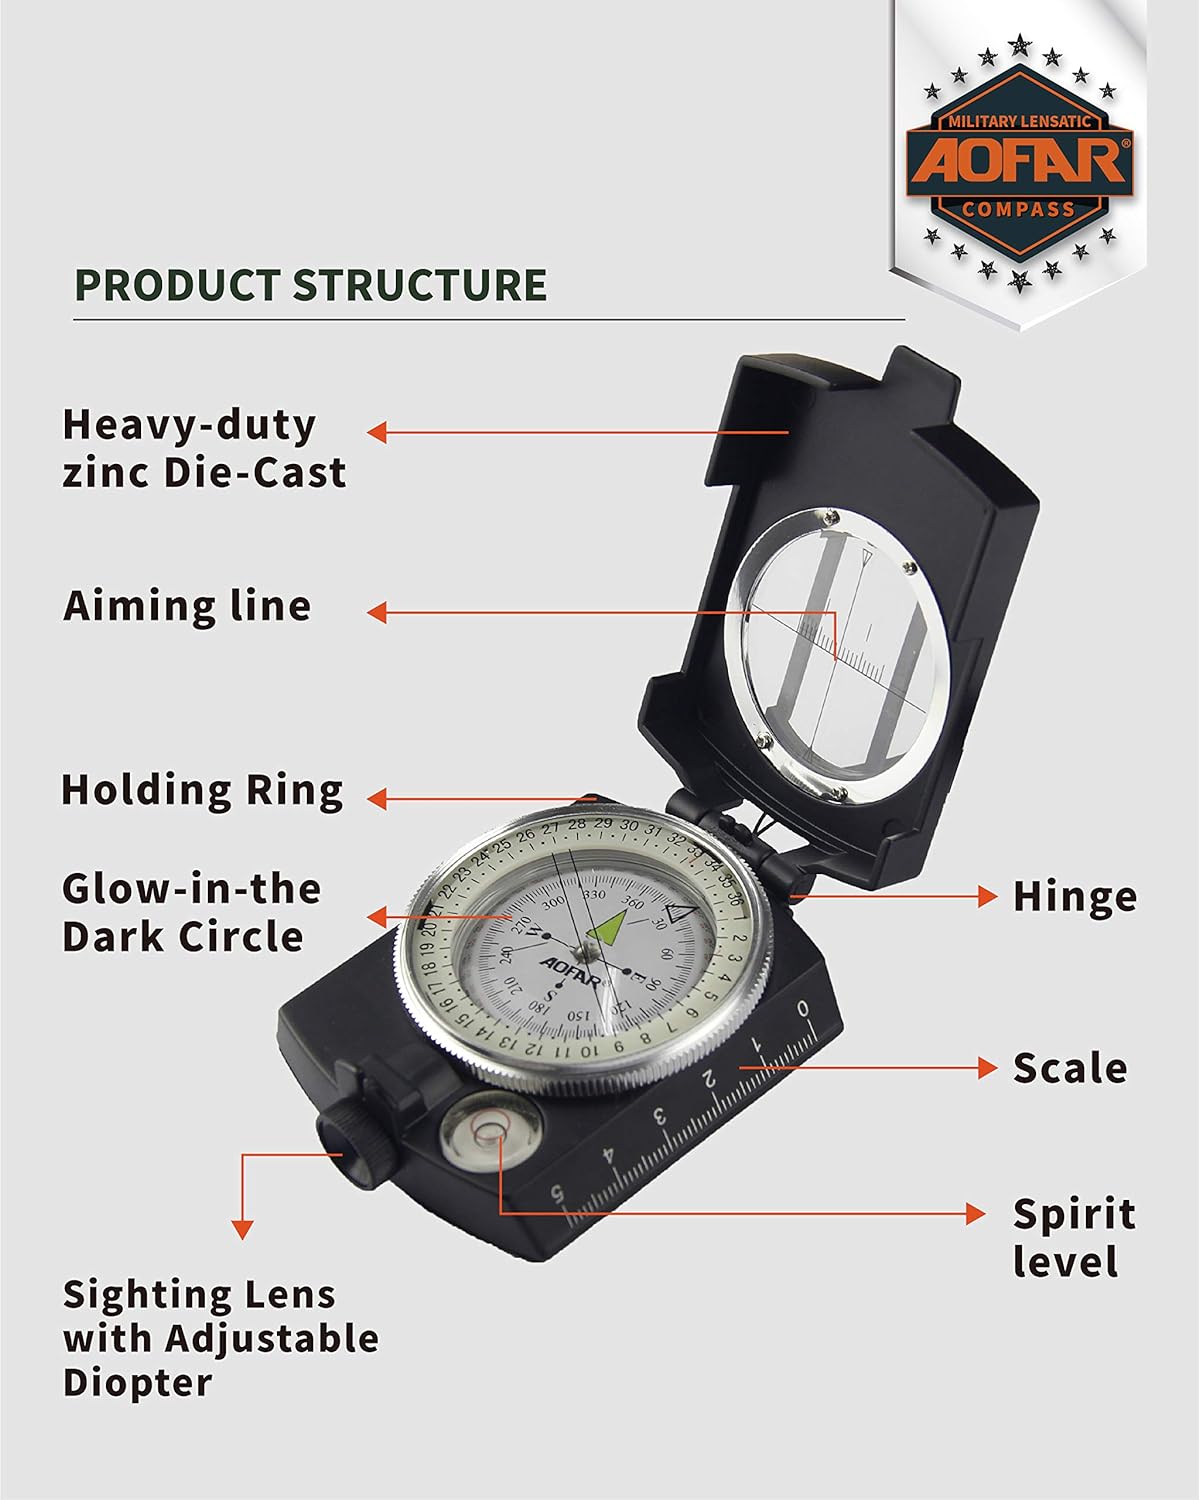 AOFAR Compass Review: Durable and Reliable Navigation Tool